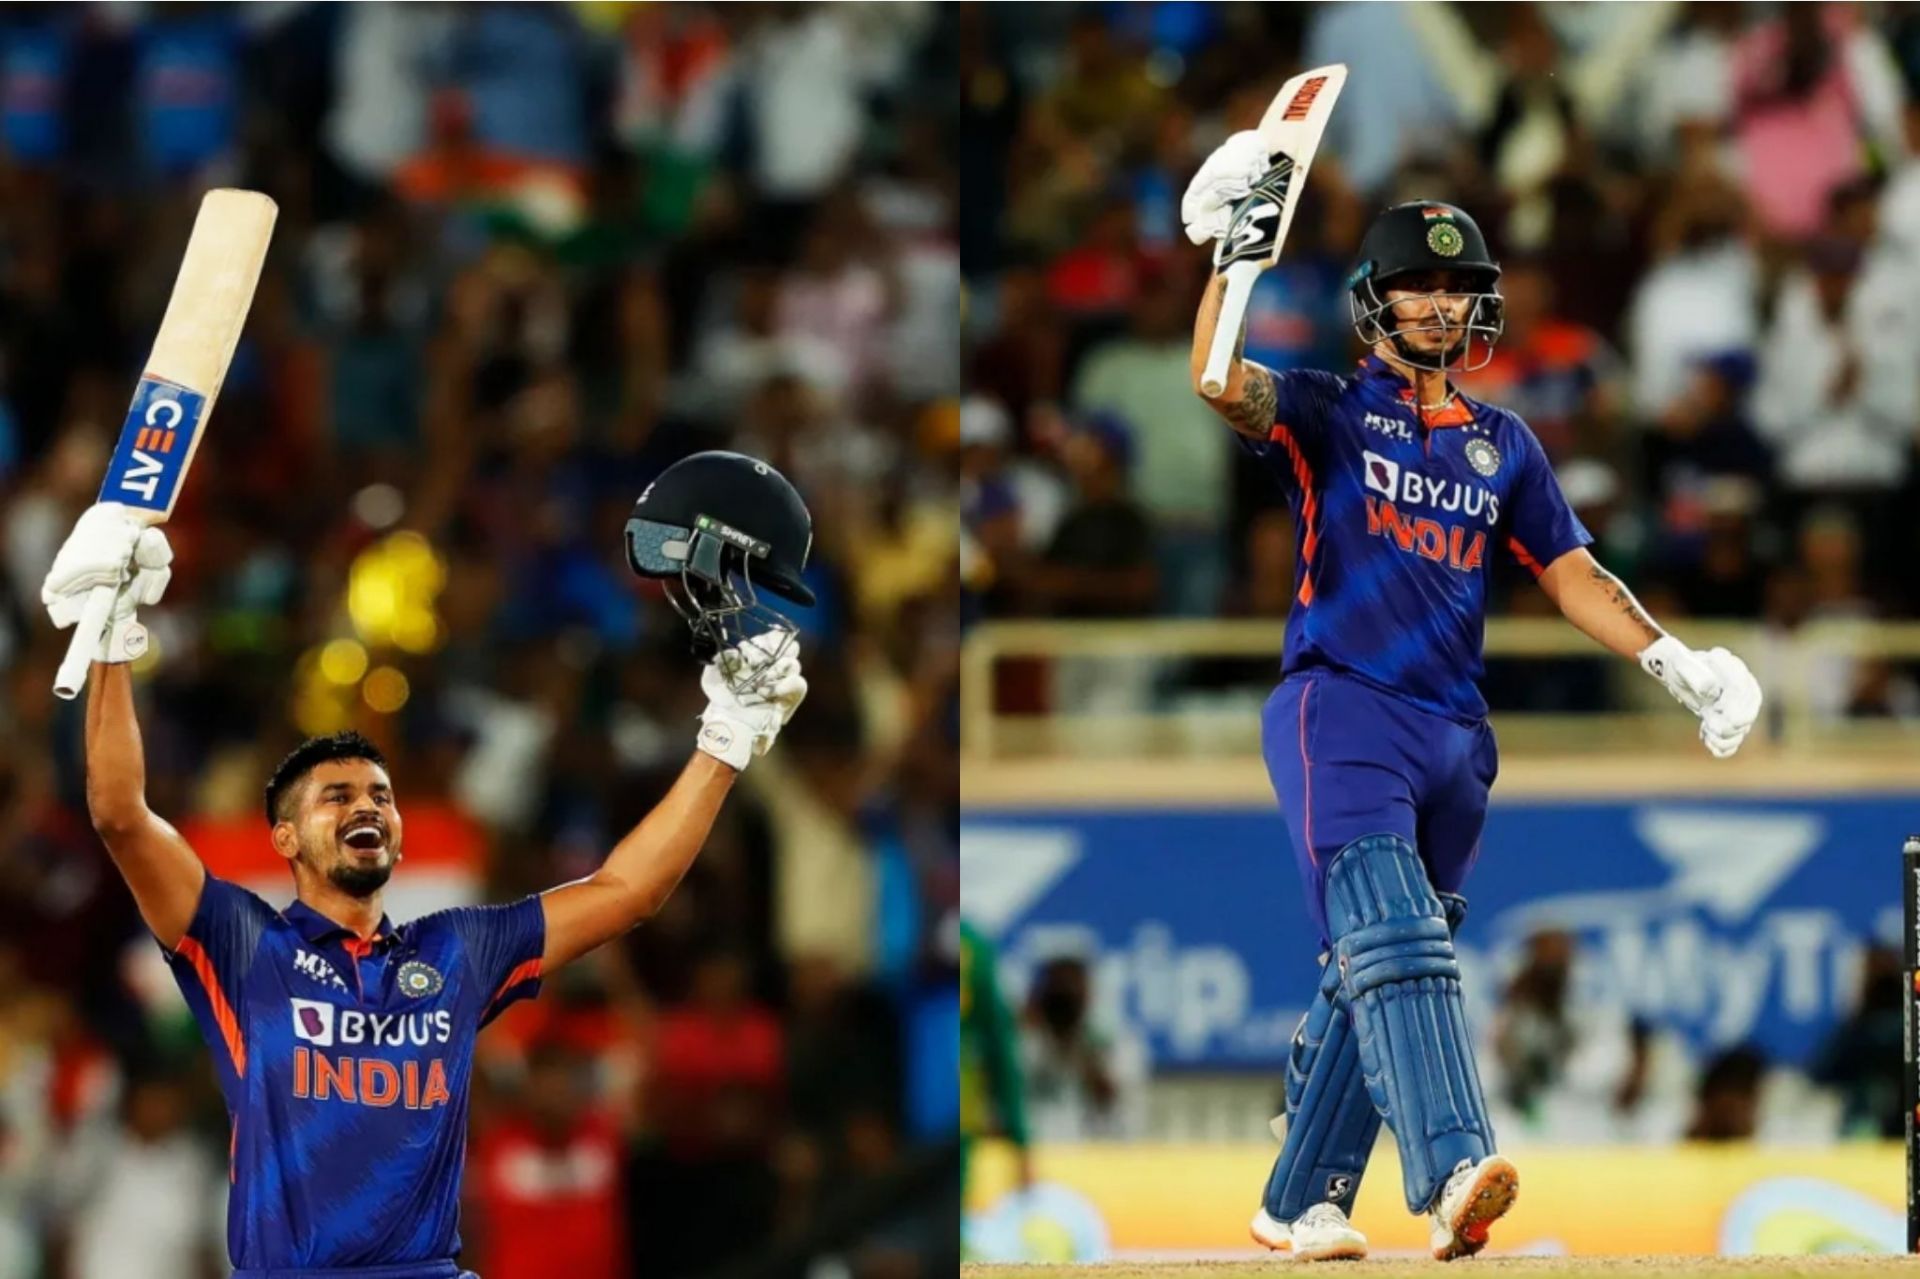 Shreyas Iyer and Ishan Kishan played sumptuous knocks in the second ODI against South Africa 